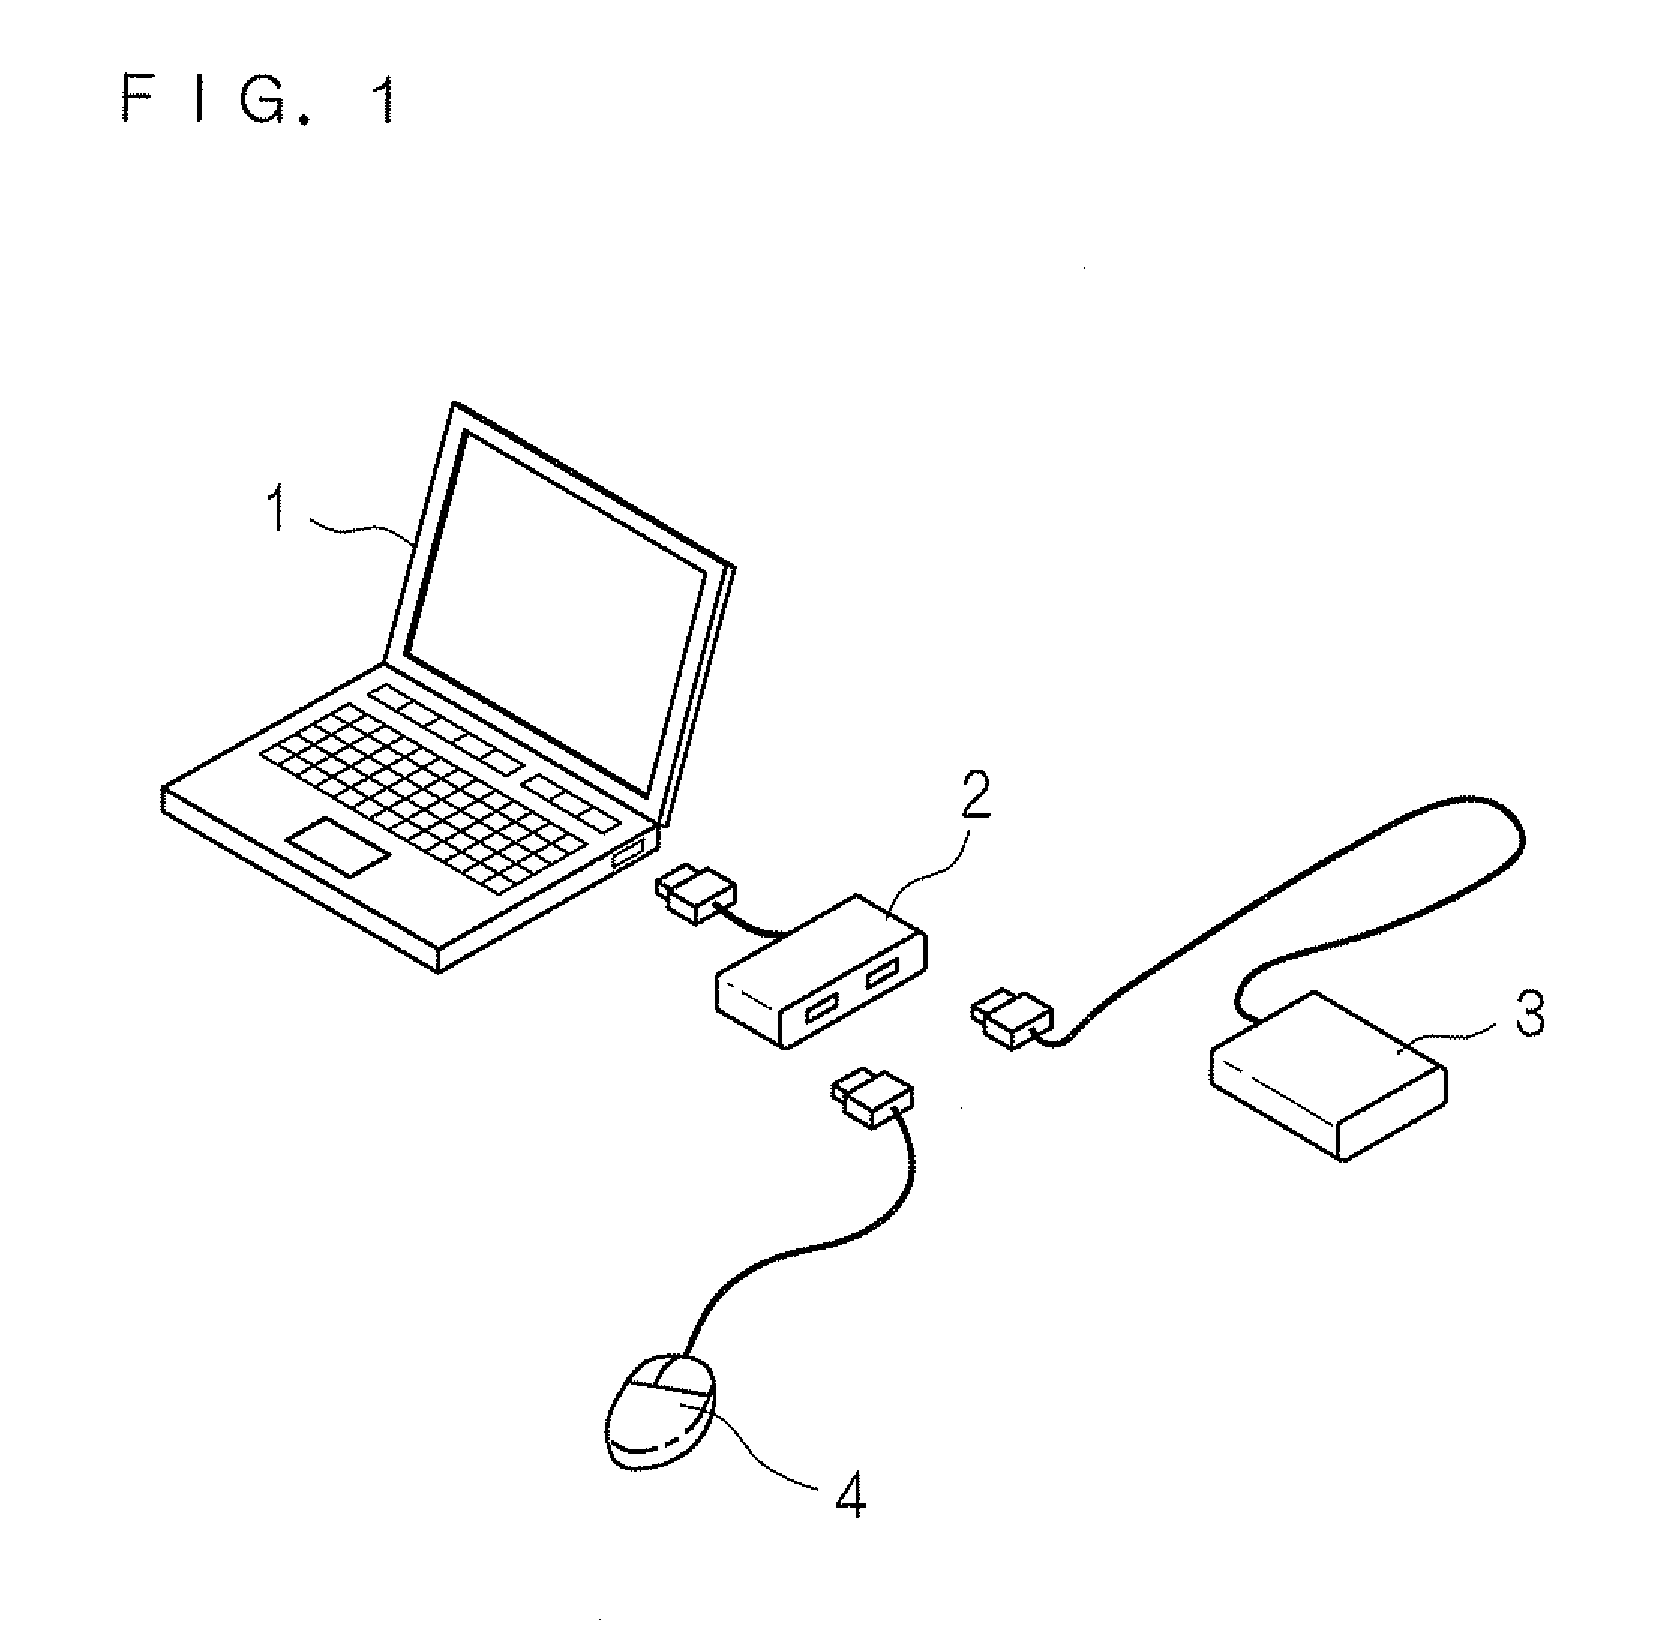 Electronic equipment system, electronic equipment and connection equipment